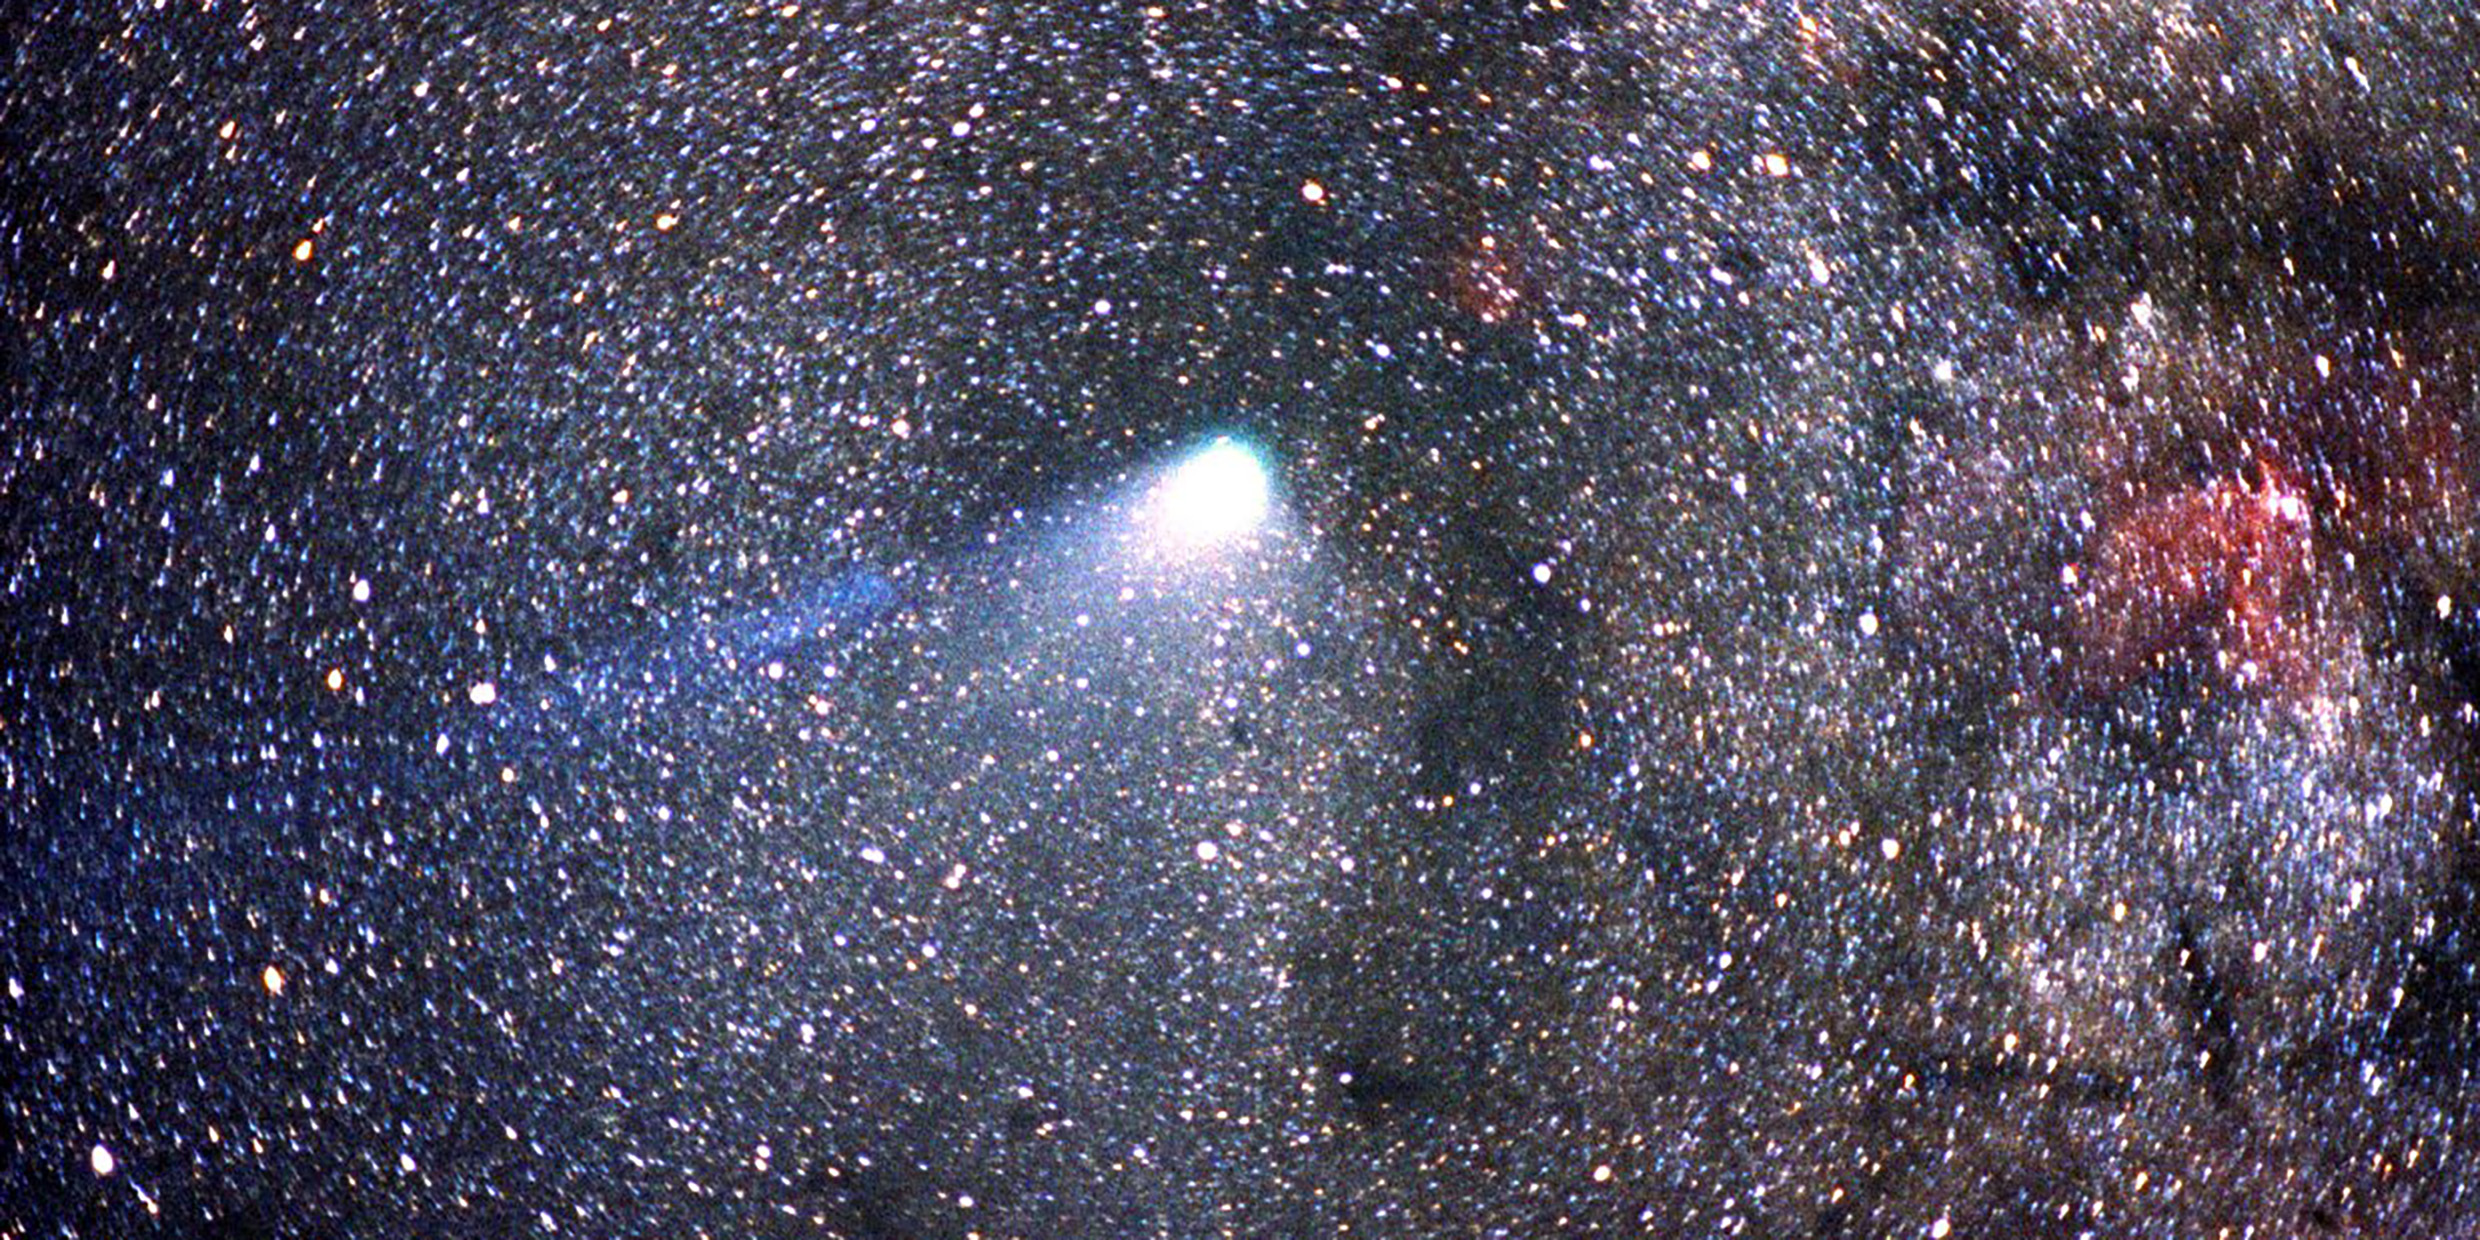 Halley’s comet: a beautiful blur of light